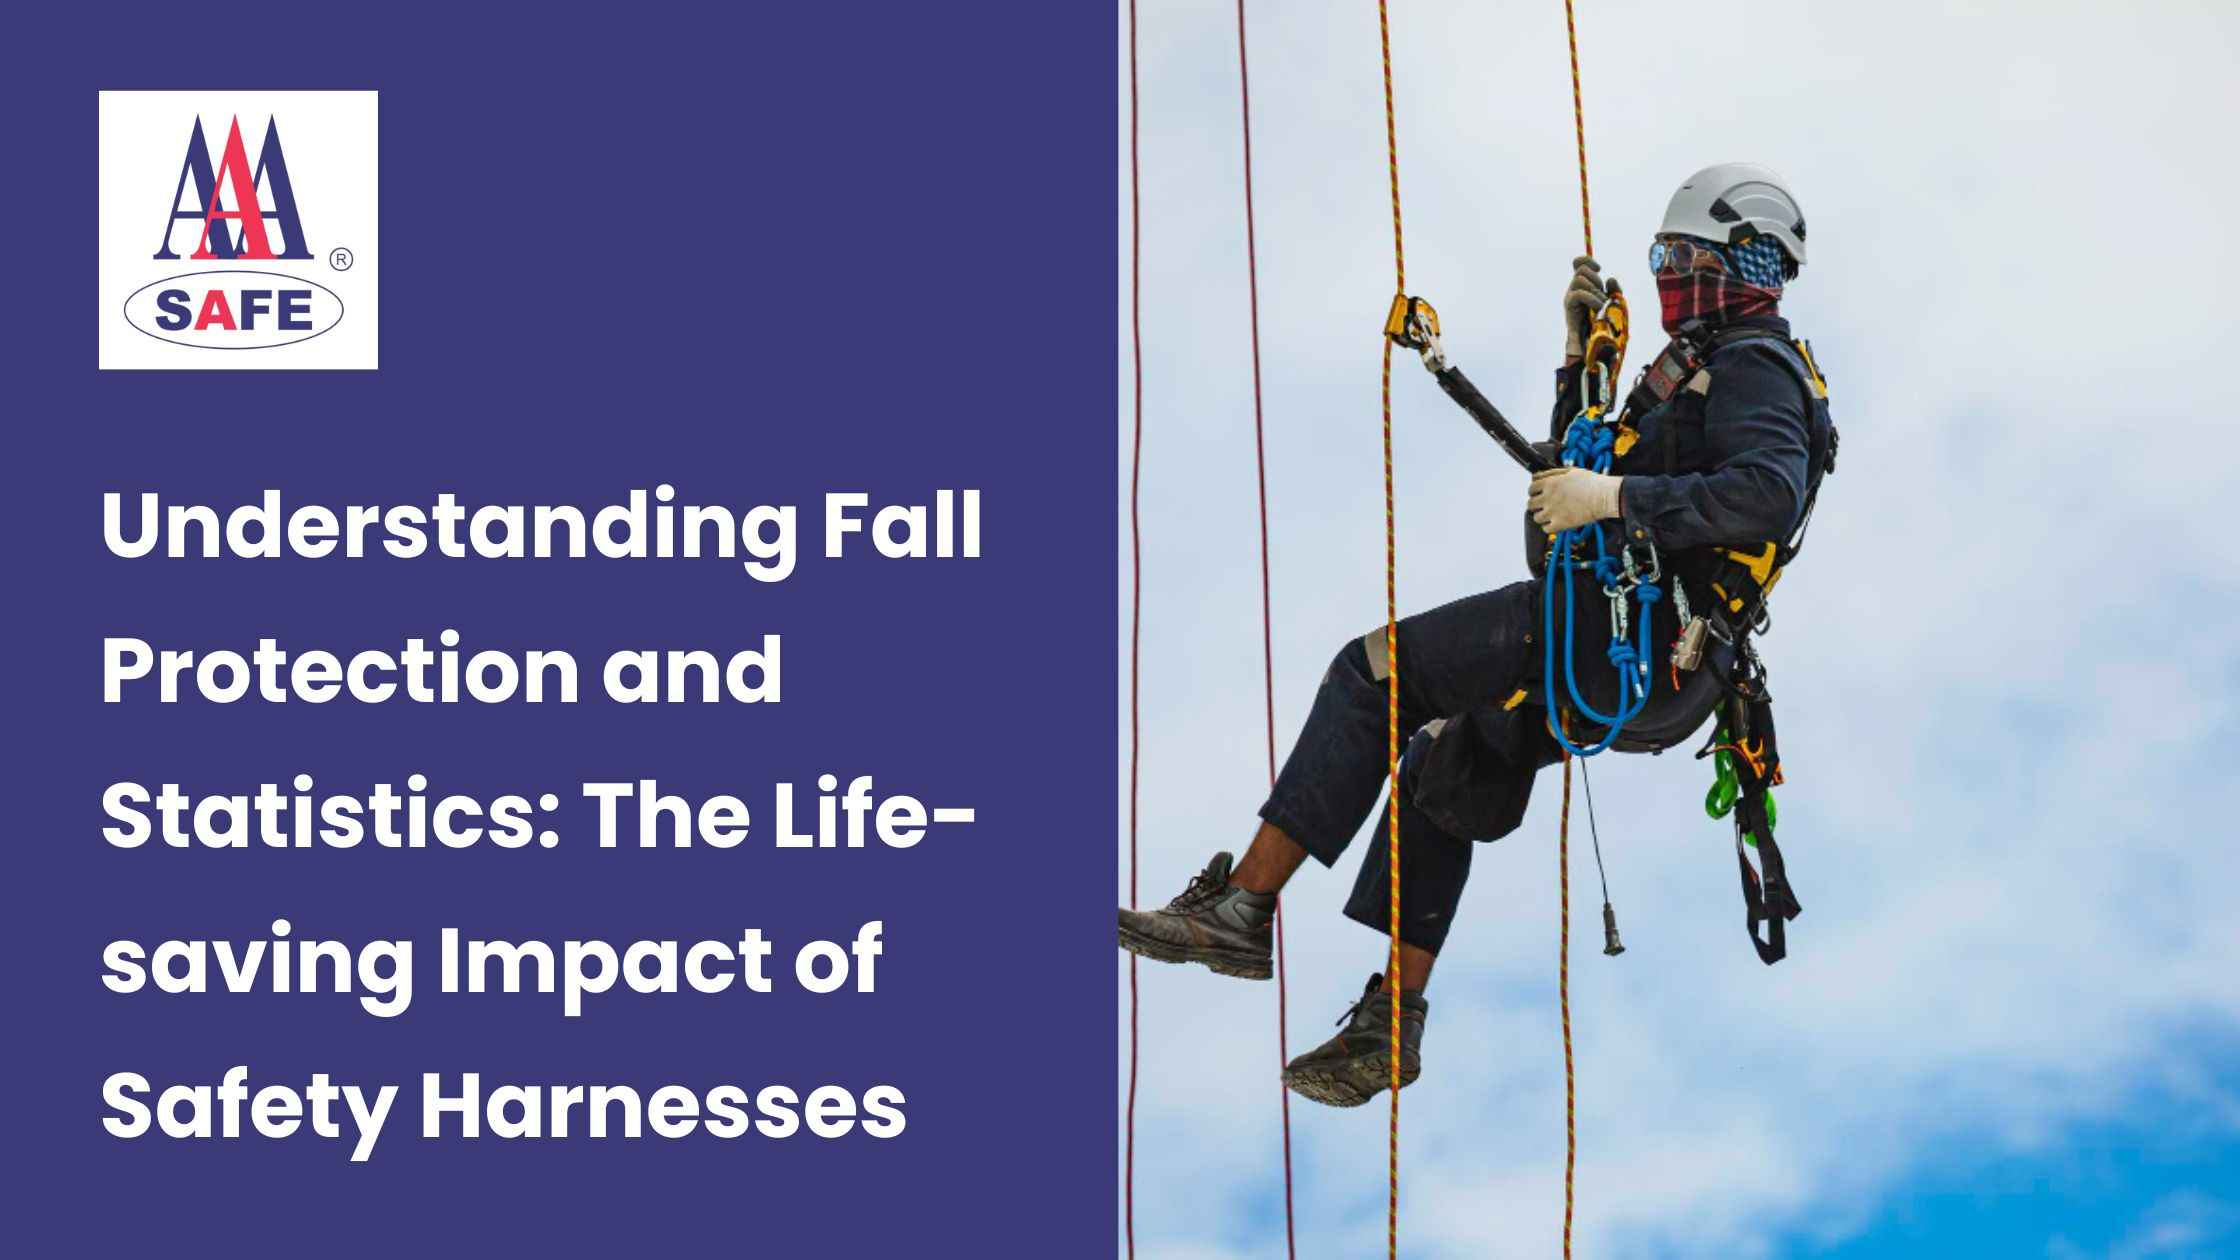 Understanding Fall Protection and Statistics: The Life-saving Impact of Safety Harnesses